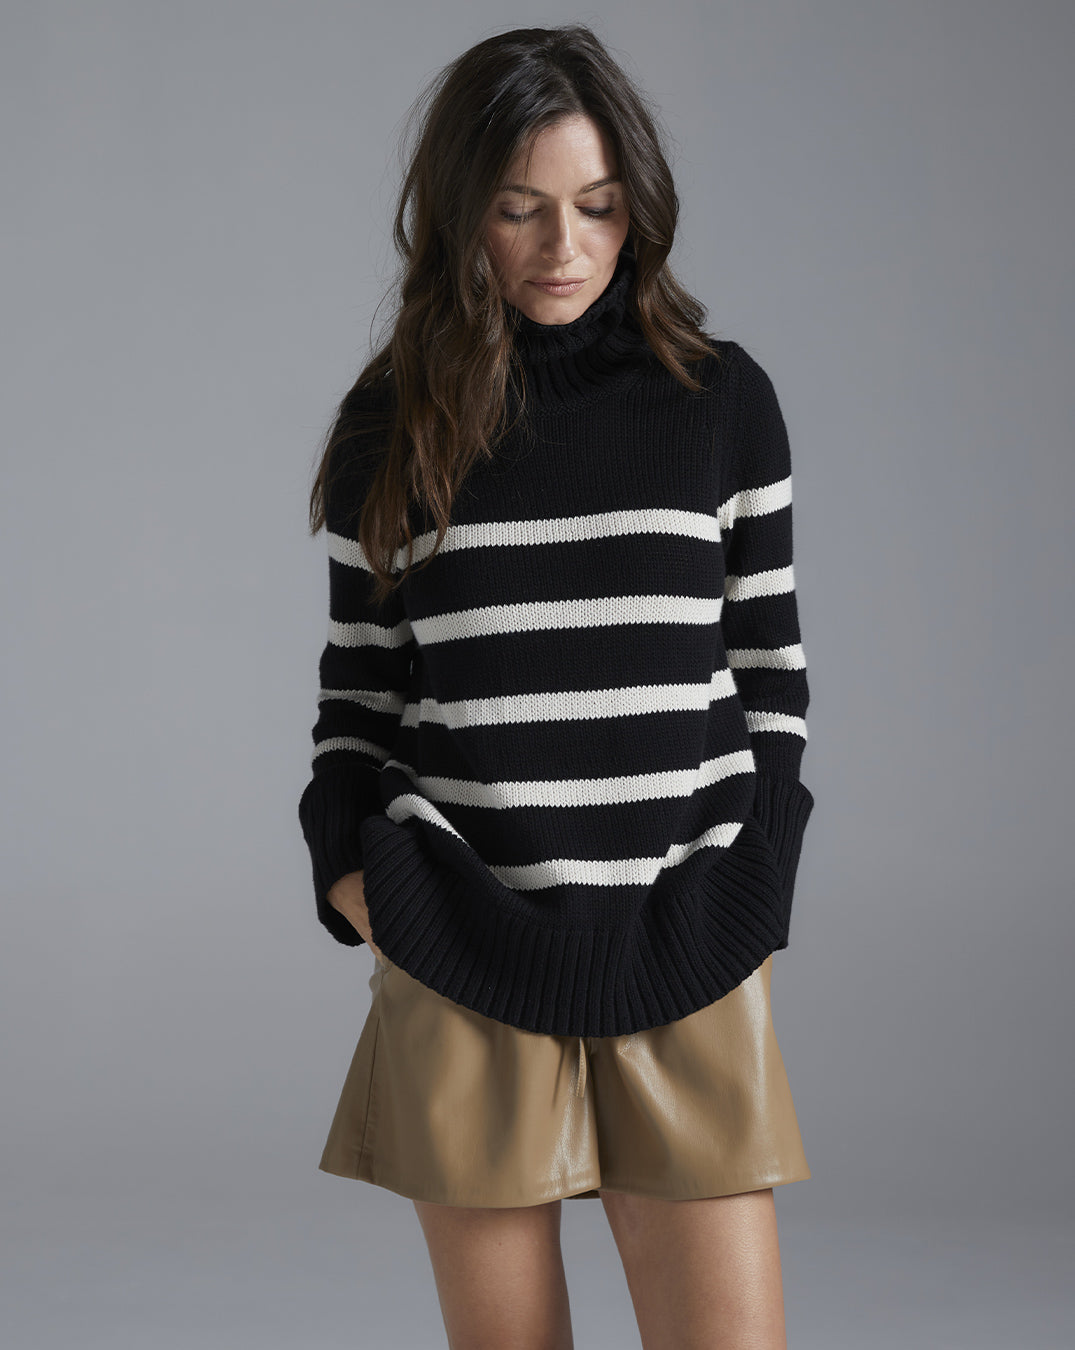 State of Cotton NYC Kittery striped sweater